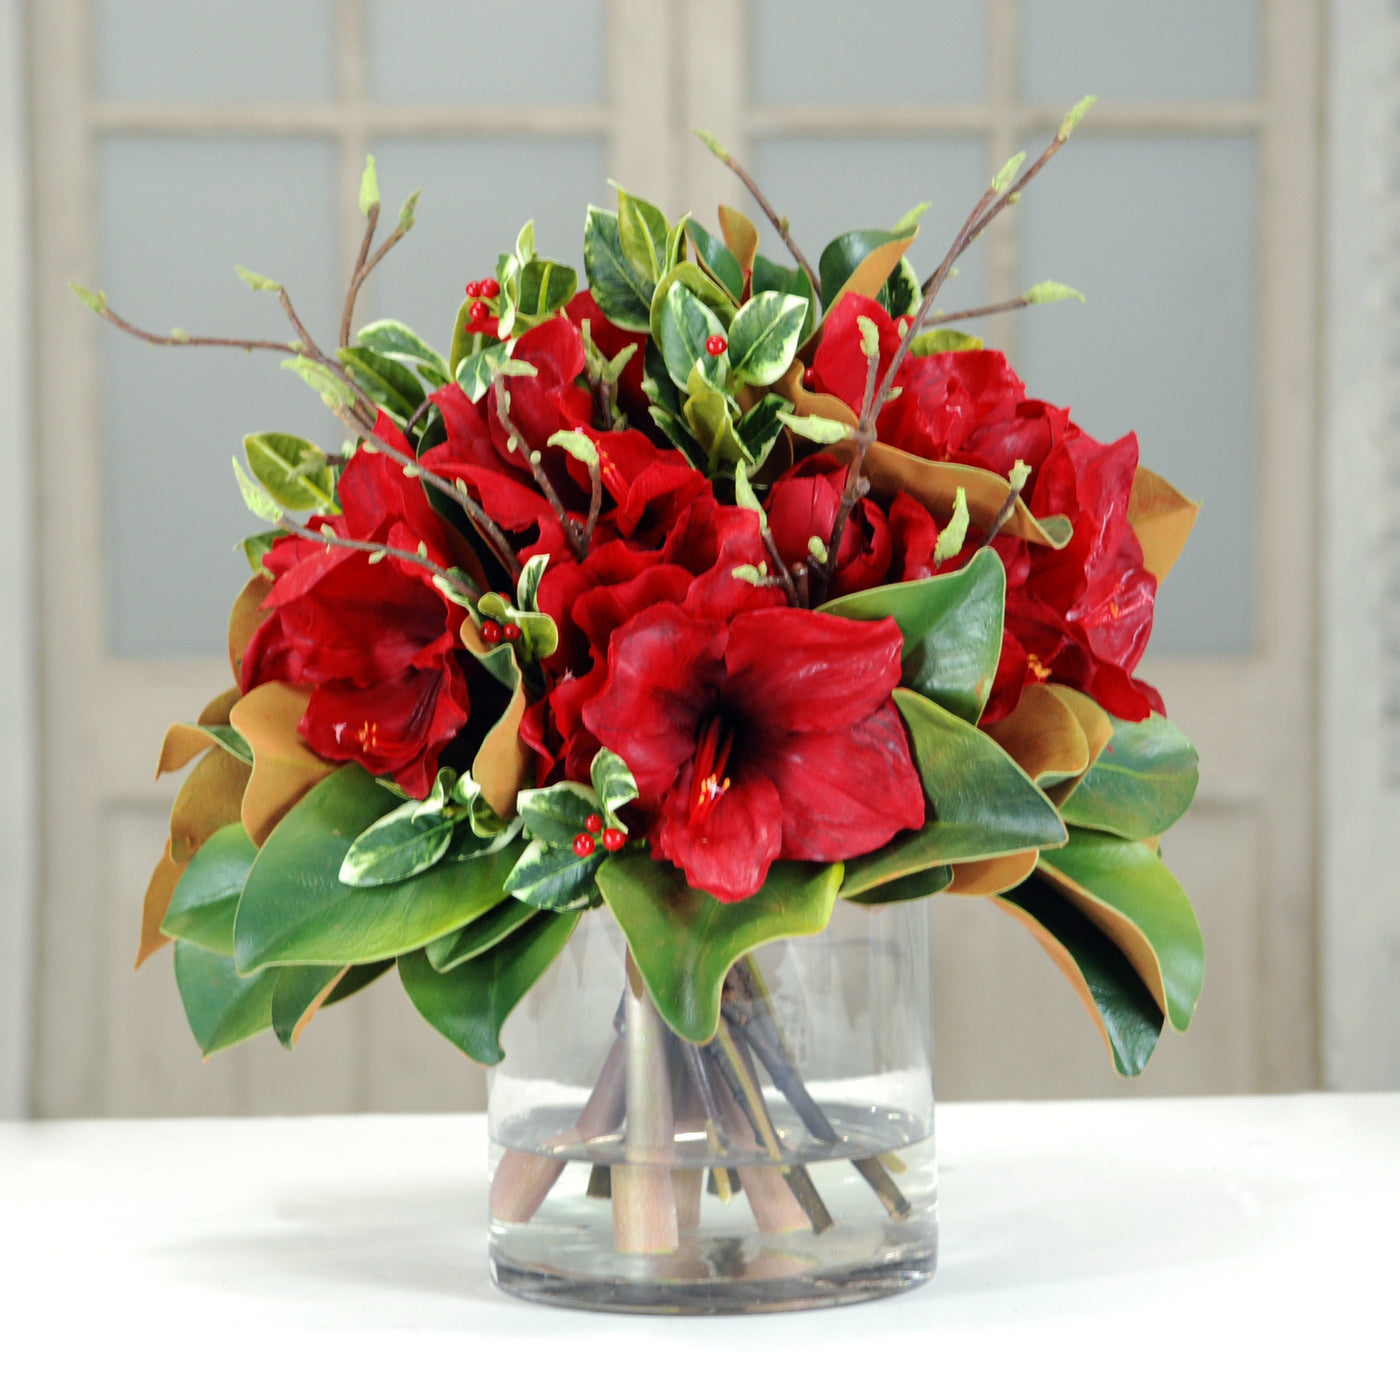 AMARYLLIS AND MAGNOLIA IN GLASS (WHXDP069-RD) - Winward Home faux floral arrangements